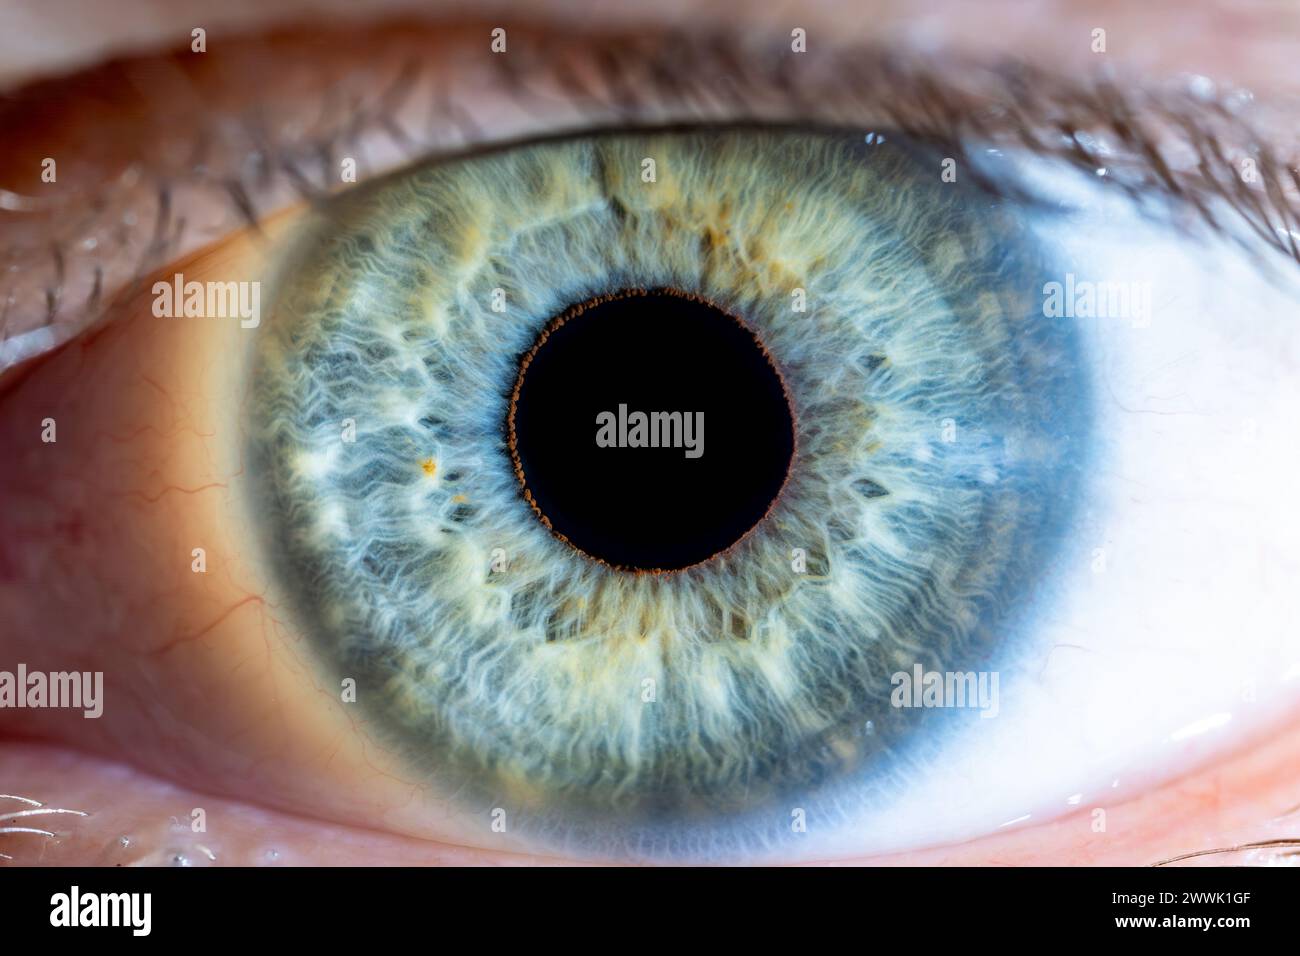 Description: High Resolution male Green-Blue Colored Eye with Yellow Pigment Spots and Pupil Wide Open. Close Up. Structural Anatomy. Human Iris. Macr Stock Photo